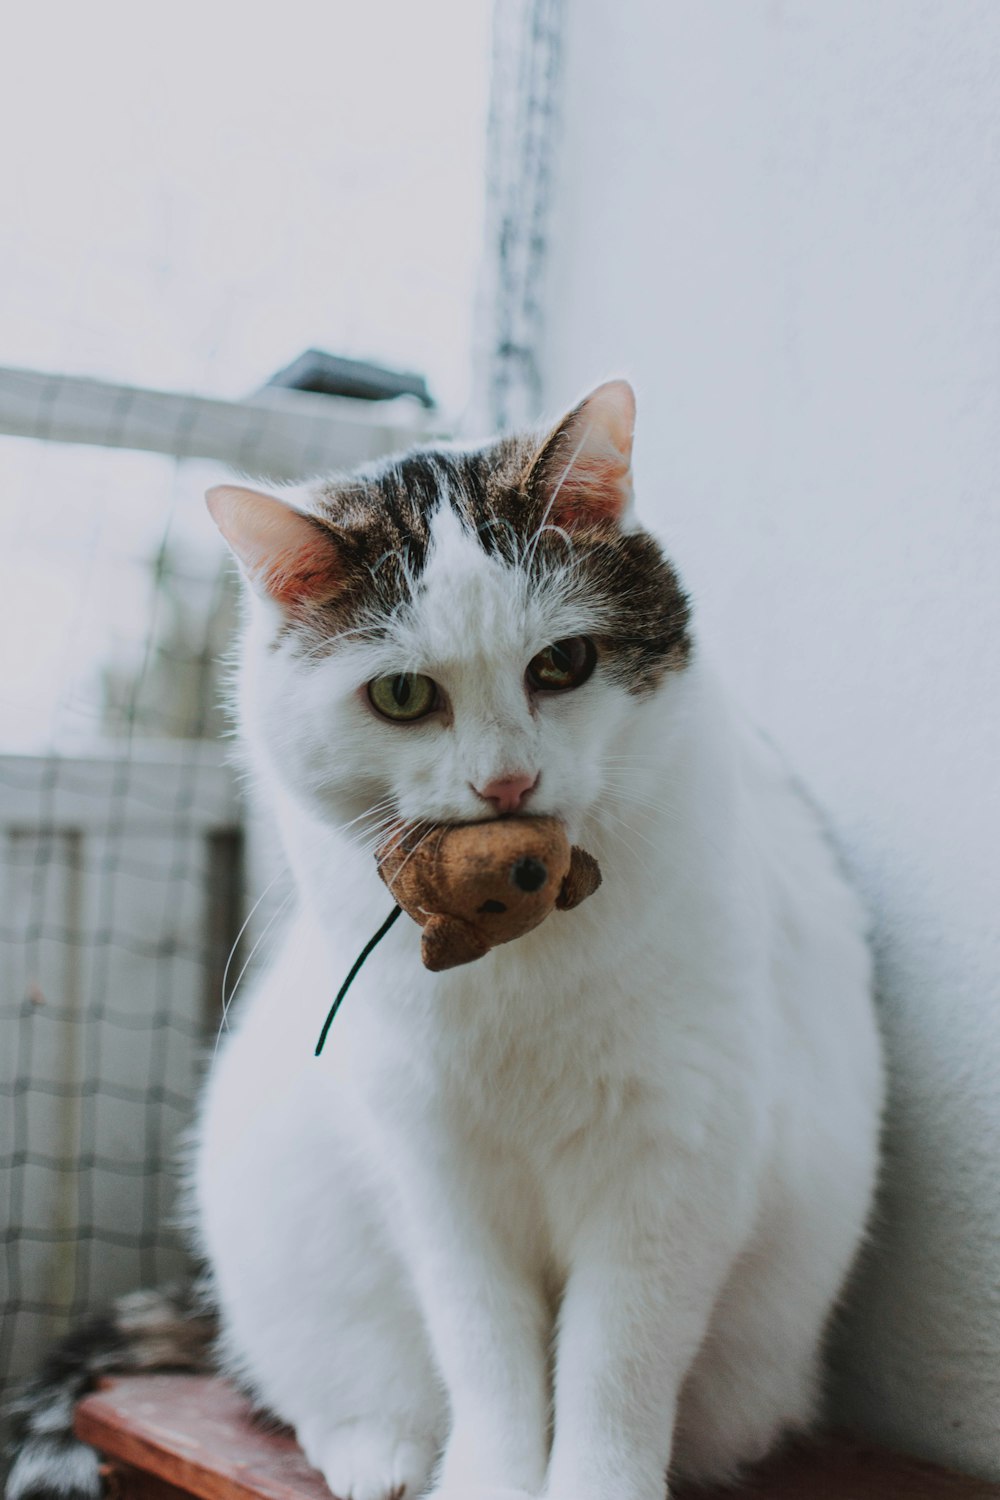 cat biting toy mouse